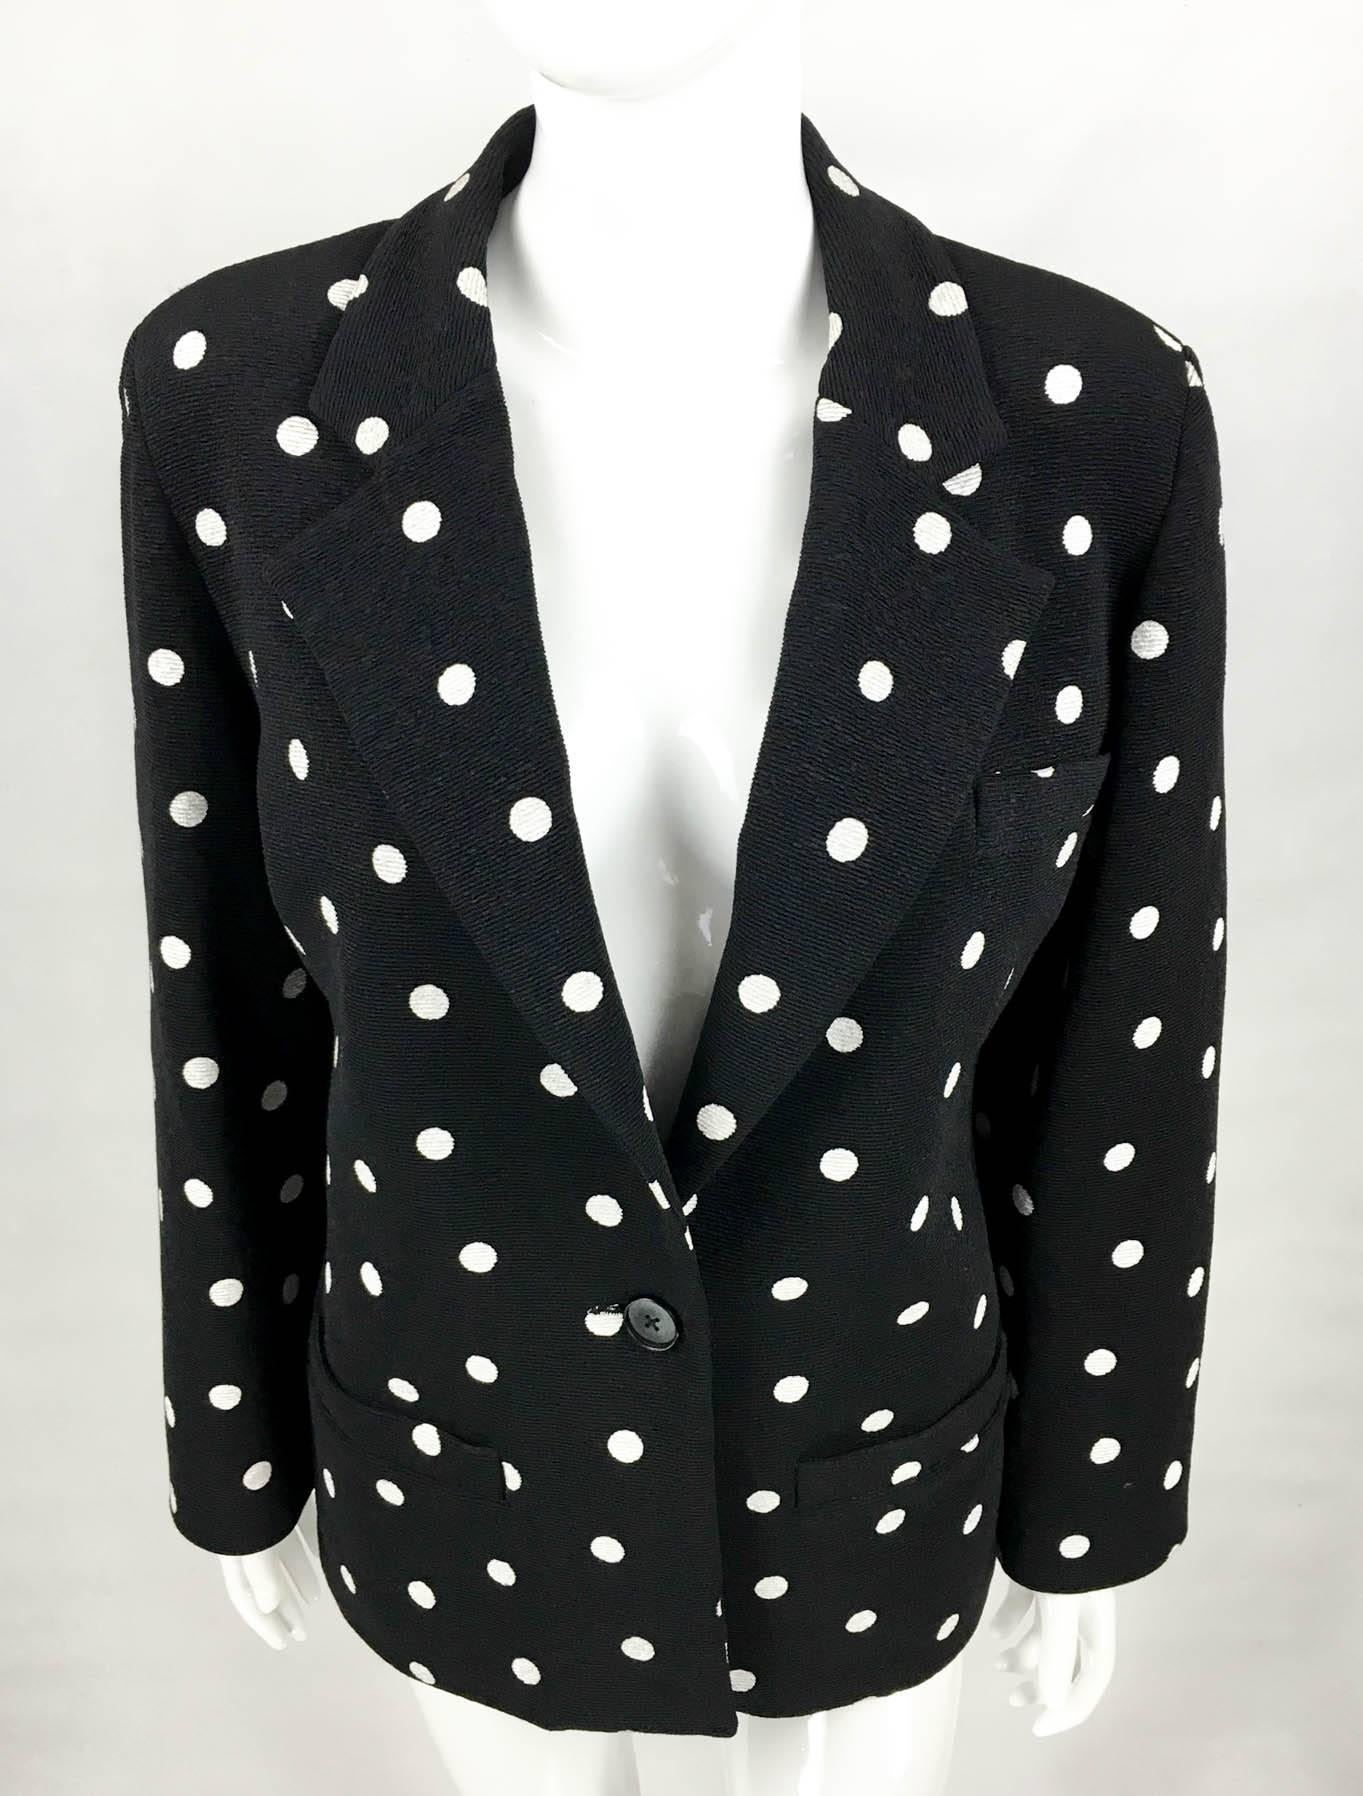 Balenciaga Black and White Polka Dot Blazer - 1980s In Excellent Condition In London, Chelsea